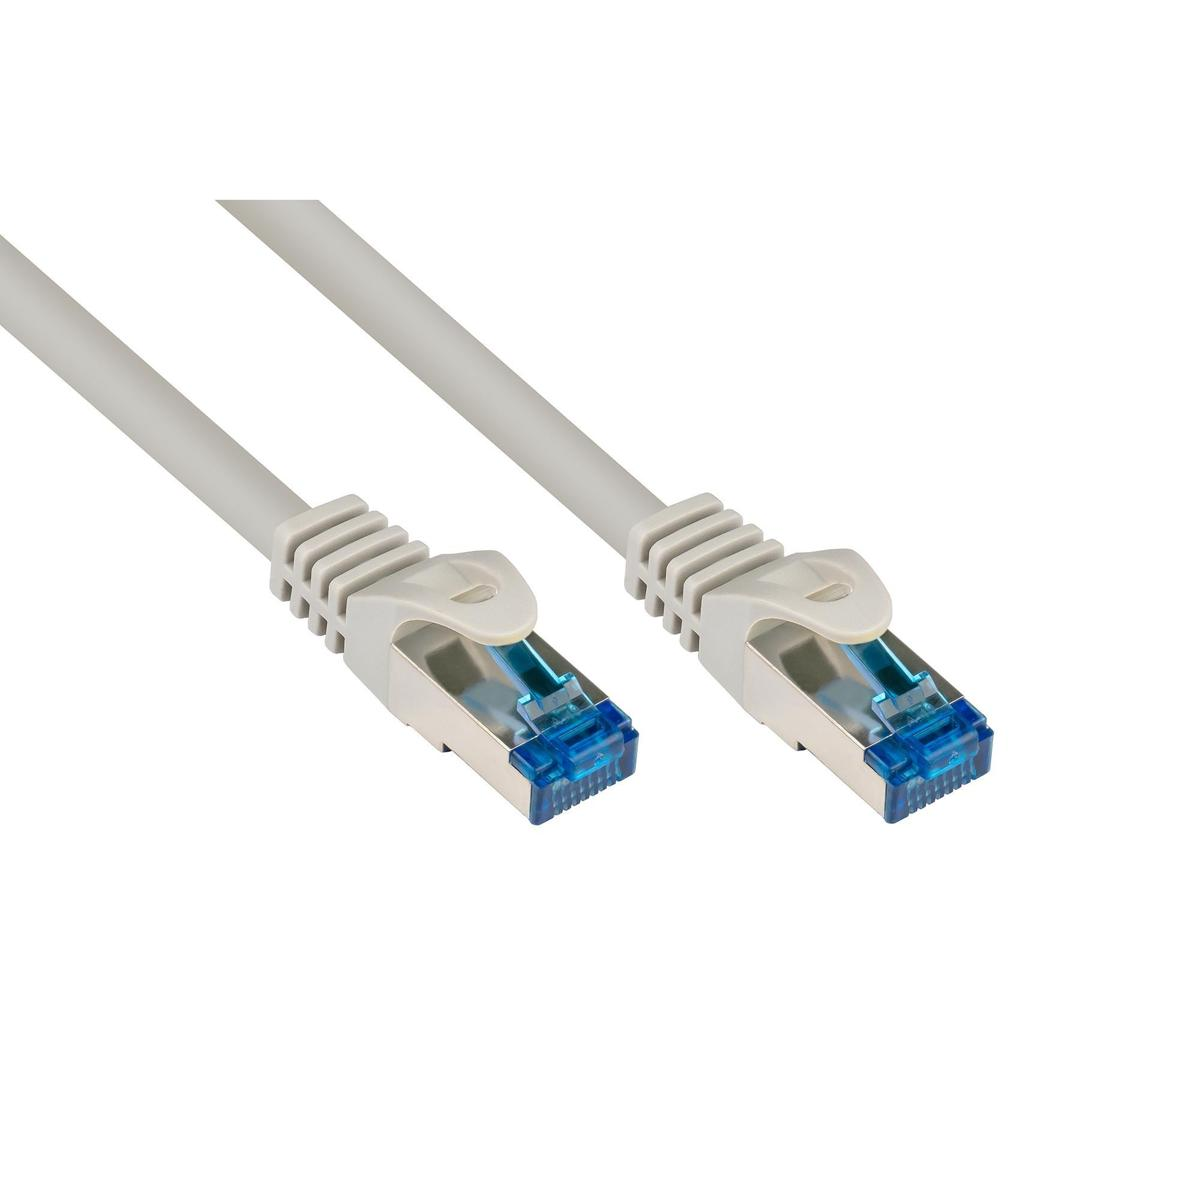 VARIA GROUP 8060-SF010 Patchcable Cat.6a, Grau